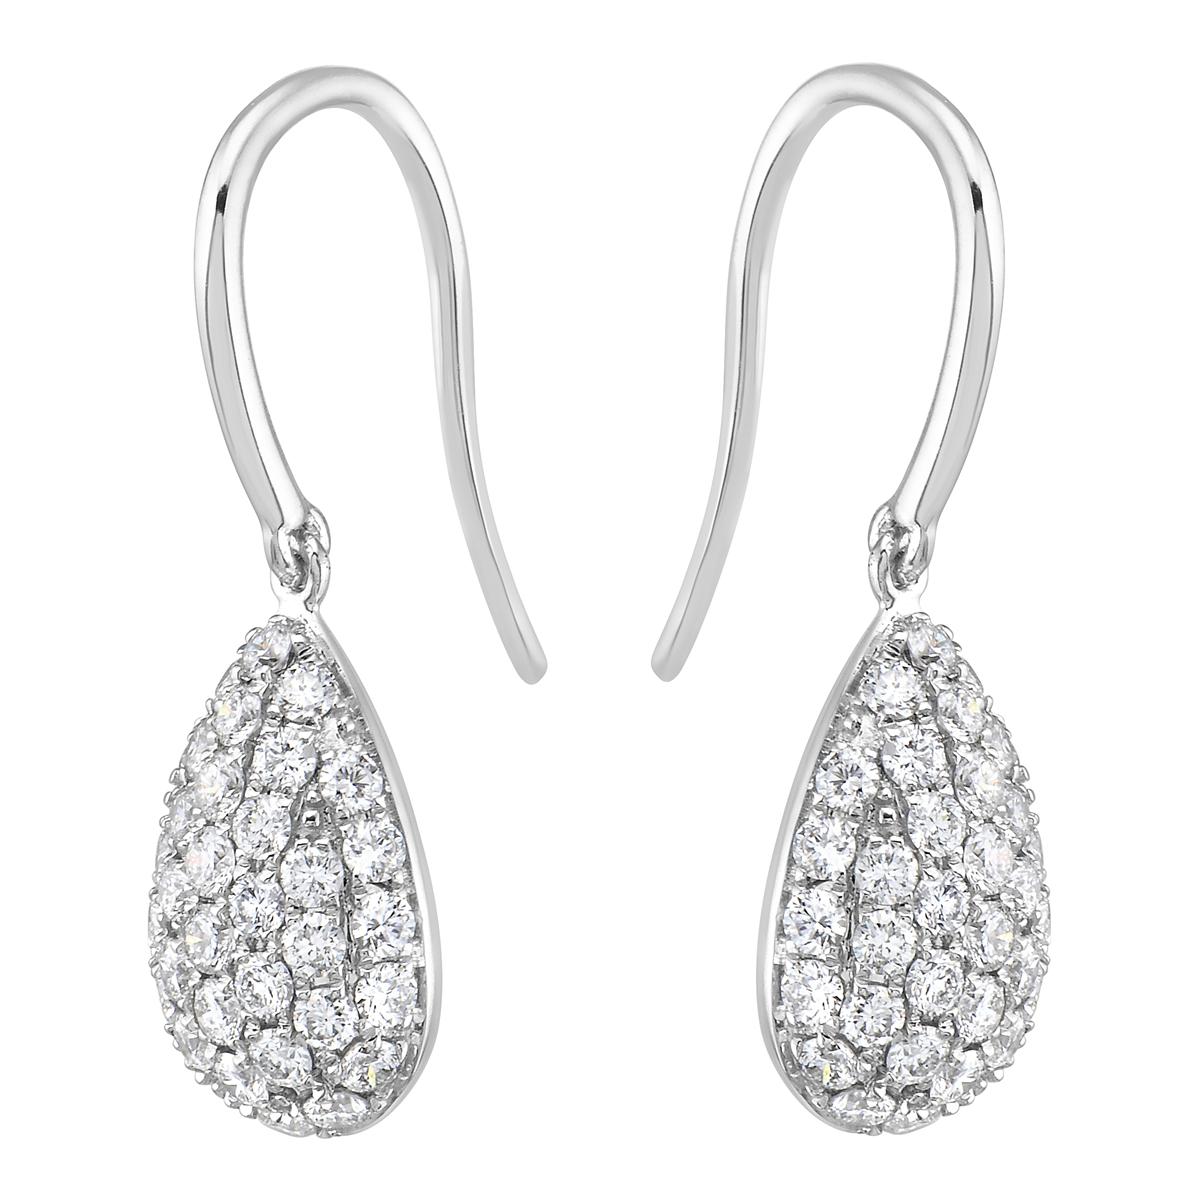 With these exquisite pear-shaped white-gold diamond dangle earrings, style and glamour are in the spotlight. These earrings are set in 18-karat gold, made out of 3.3 grams of gold. The color of the diamonds is G color and the clarity of the diamonds